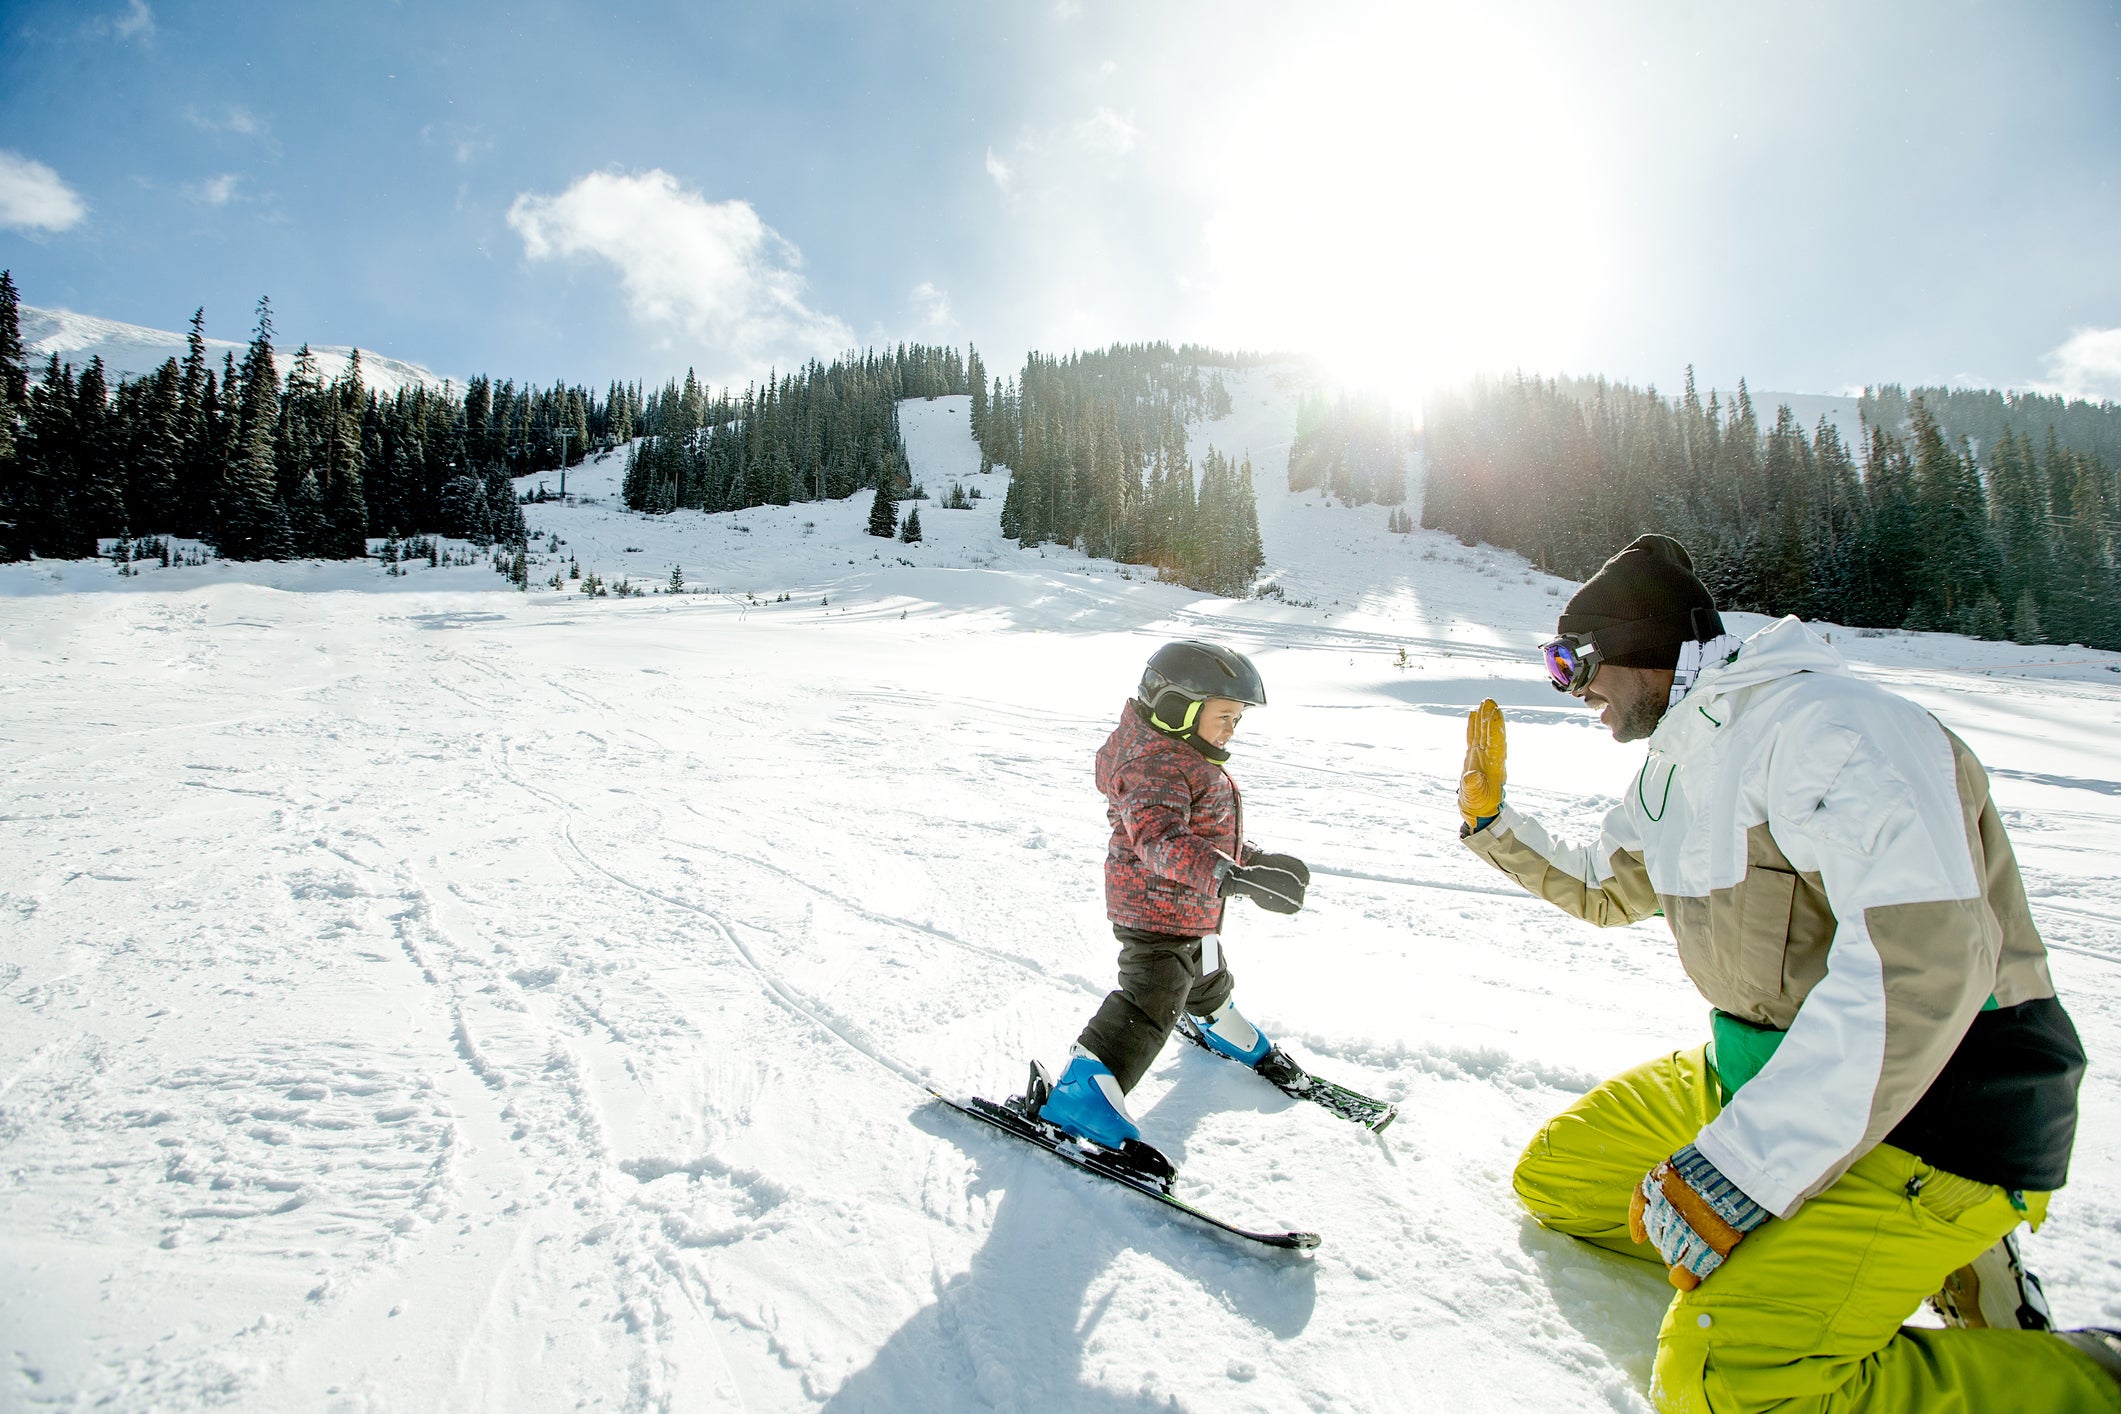 Save up to $125 on lift tickets at Big Sky and other big ski resorts with Amex Offers